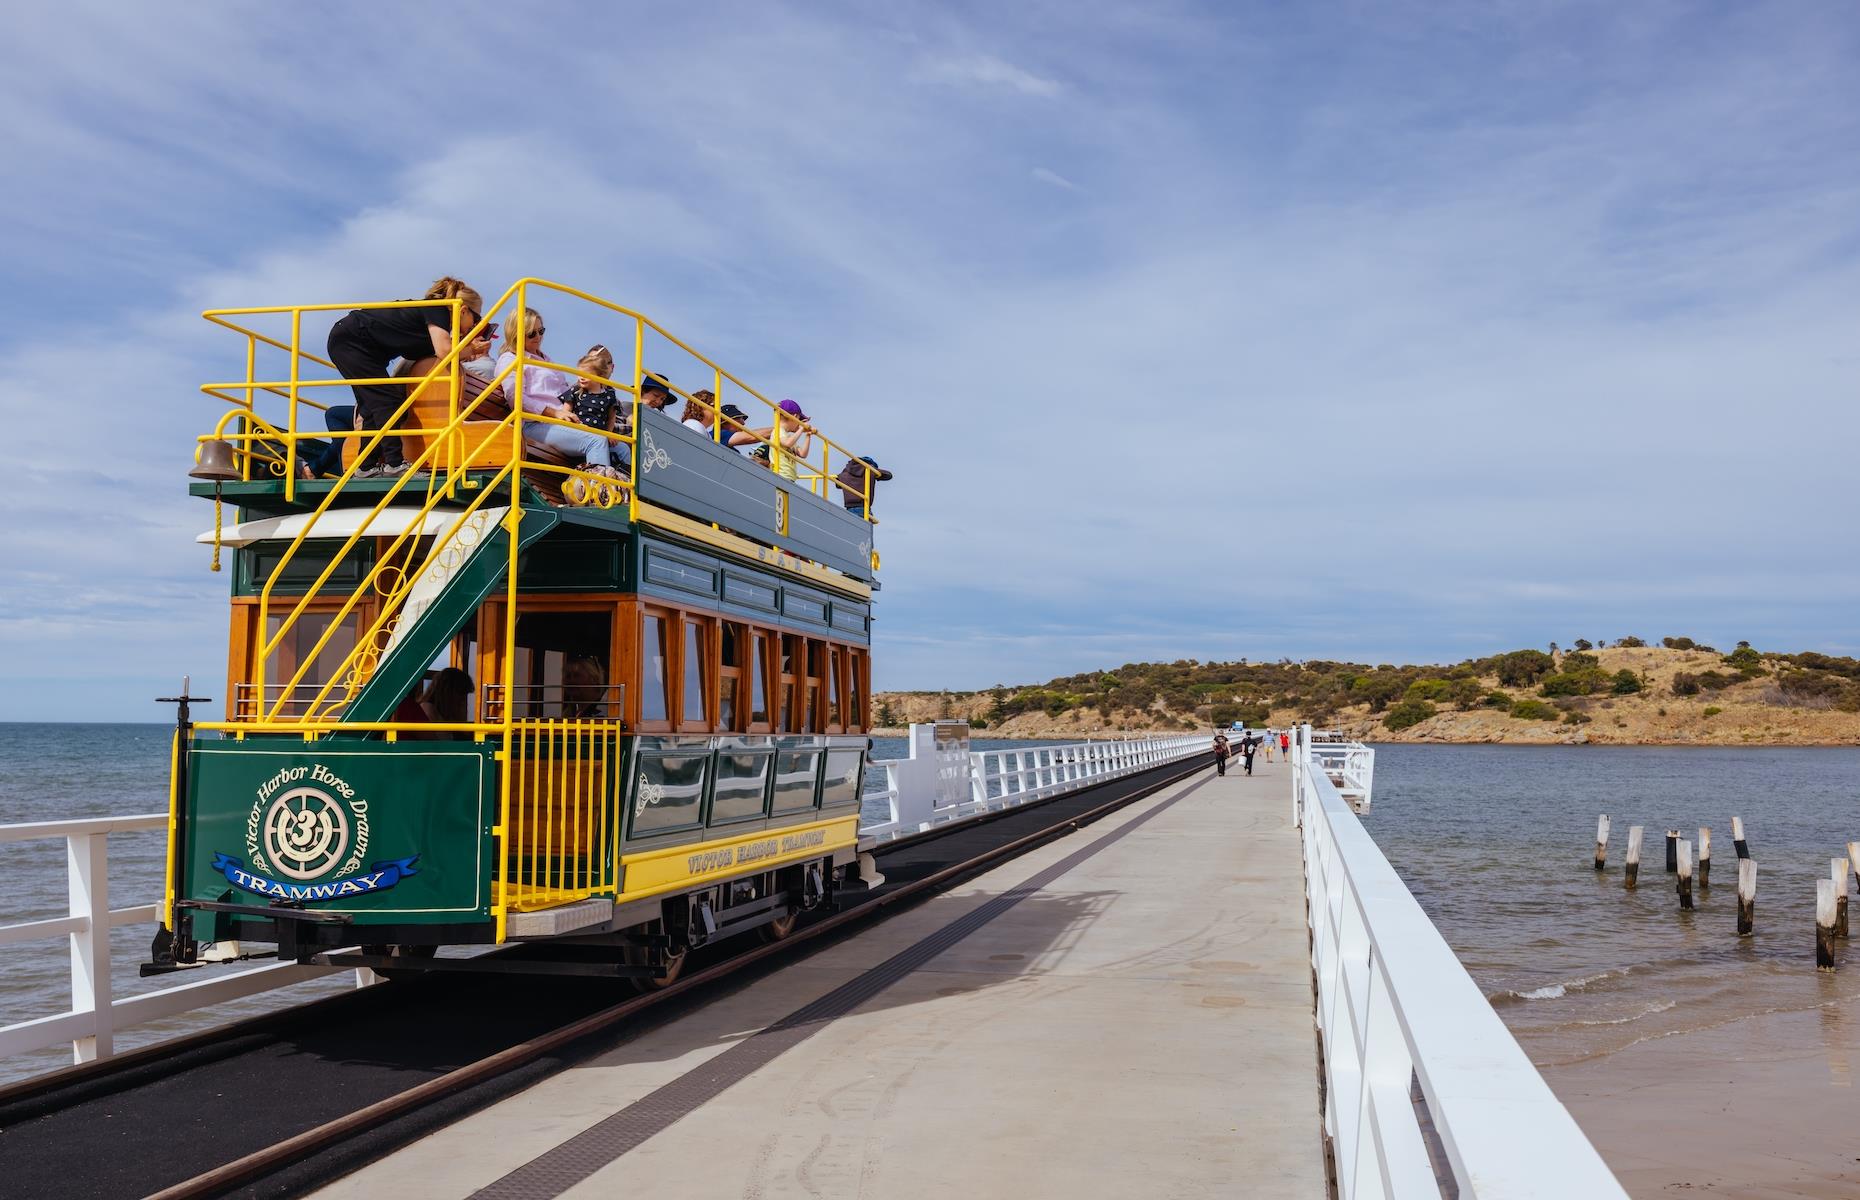 <p>Aside from whale watching, one of the most popular things to do in Victor Harbor is to catch the horse-drawn tram over the causeway to rugged Granite Island. Drawn by Clydesdale horses, the tramway began operating in 1894. An iconic landmark, the old heritage-listed causeway was decommissioned in 2022 due to safety concerns and a new one recently opened. The ends of the old structure are now viewing platforms. Carry on your journey into the past by boarding the heritage <a href="https://www.steamrangerheritagerailway.org/our-trains/cockle-train/">Cockle Train </a>for a steam-rail ride along the high cliffs en route to Port Elliot and Goolwa where more heritage beauty awaits.</p>